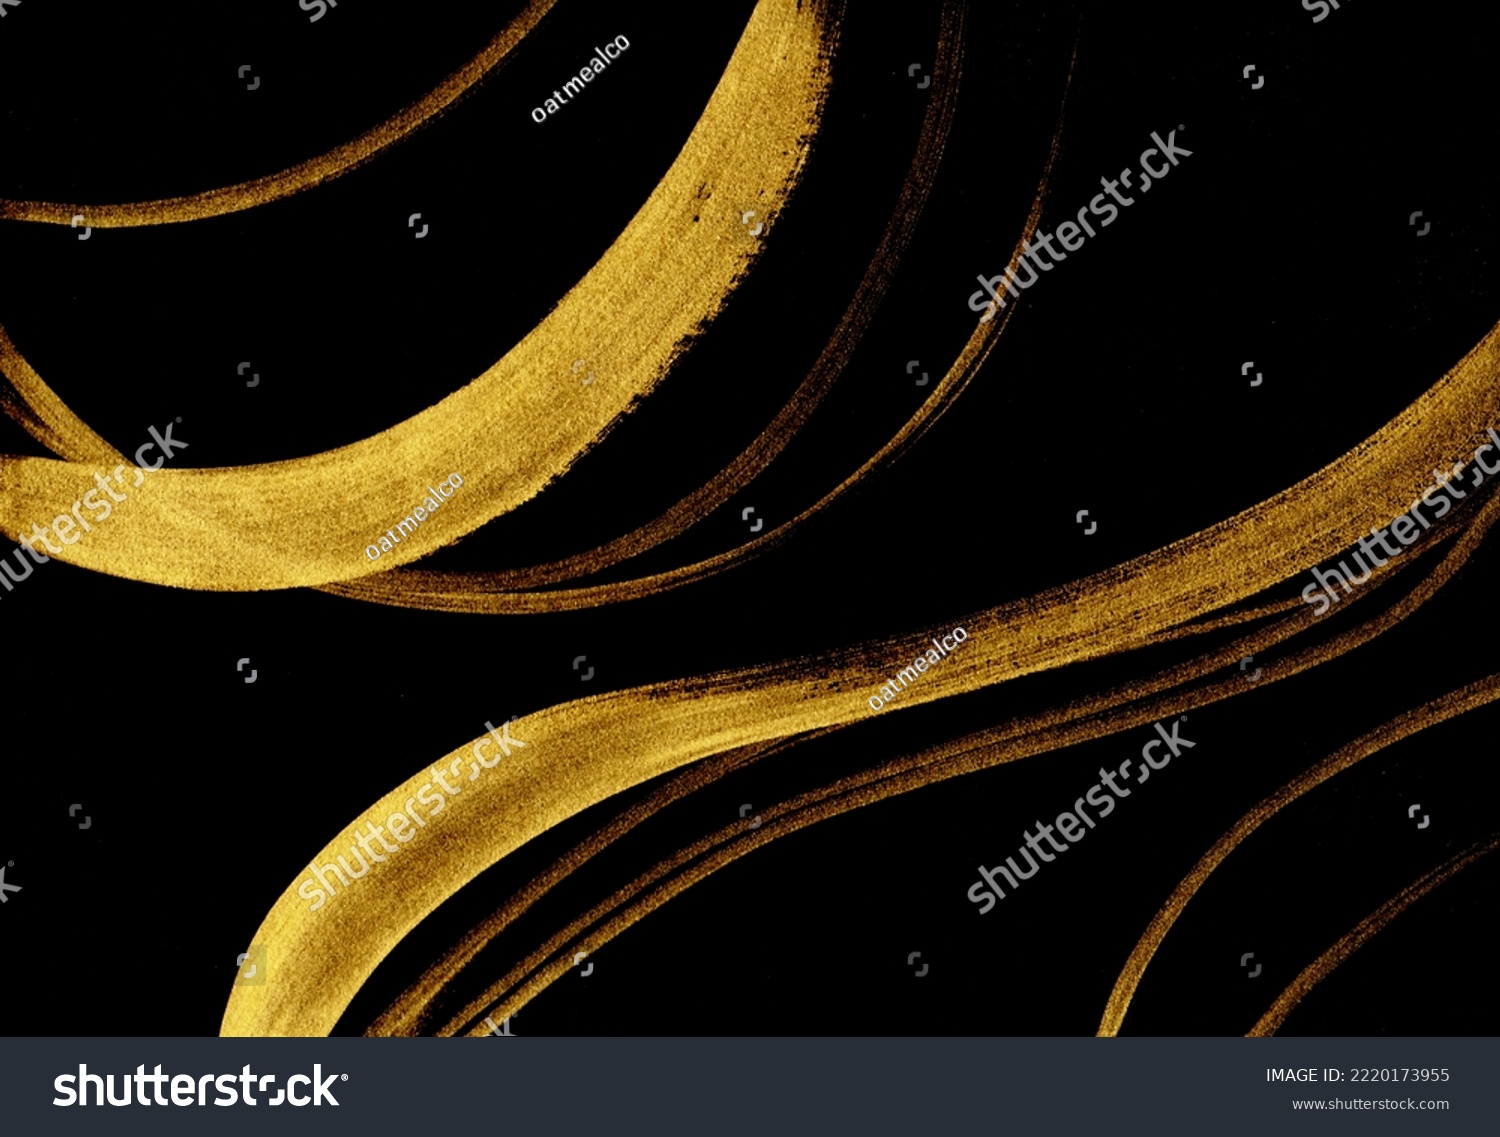 This is a background image in which silver intersecting streamlines are drawn with a brush on a black background
 #2220173955